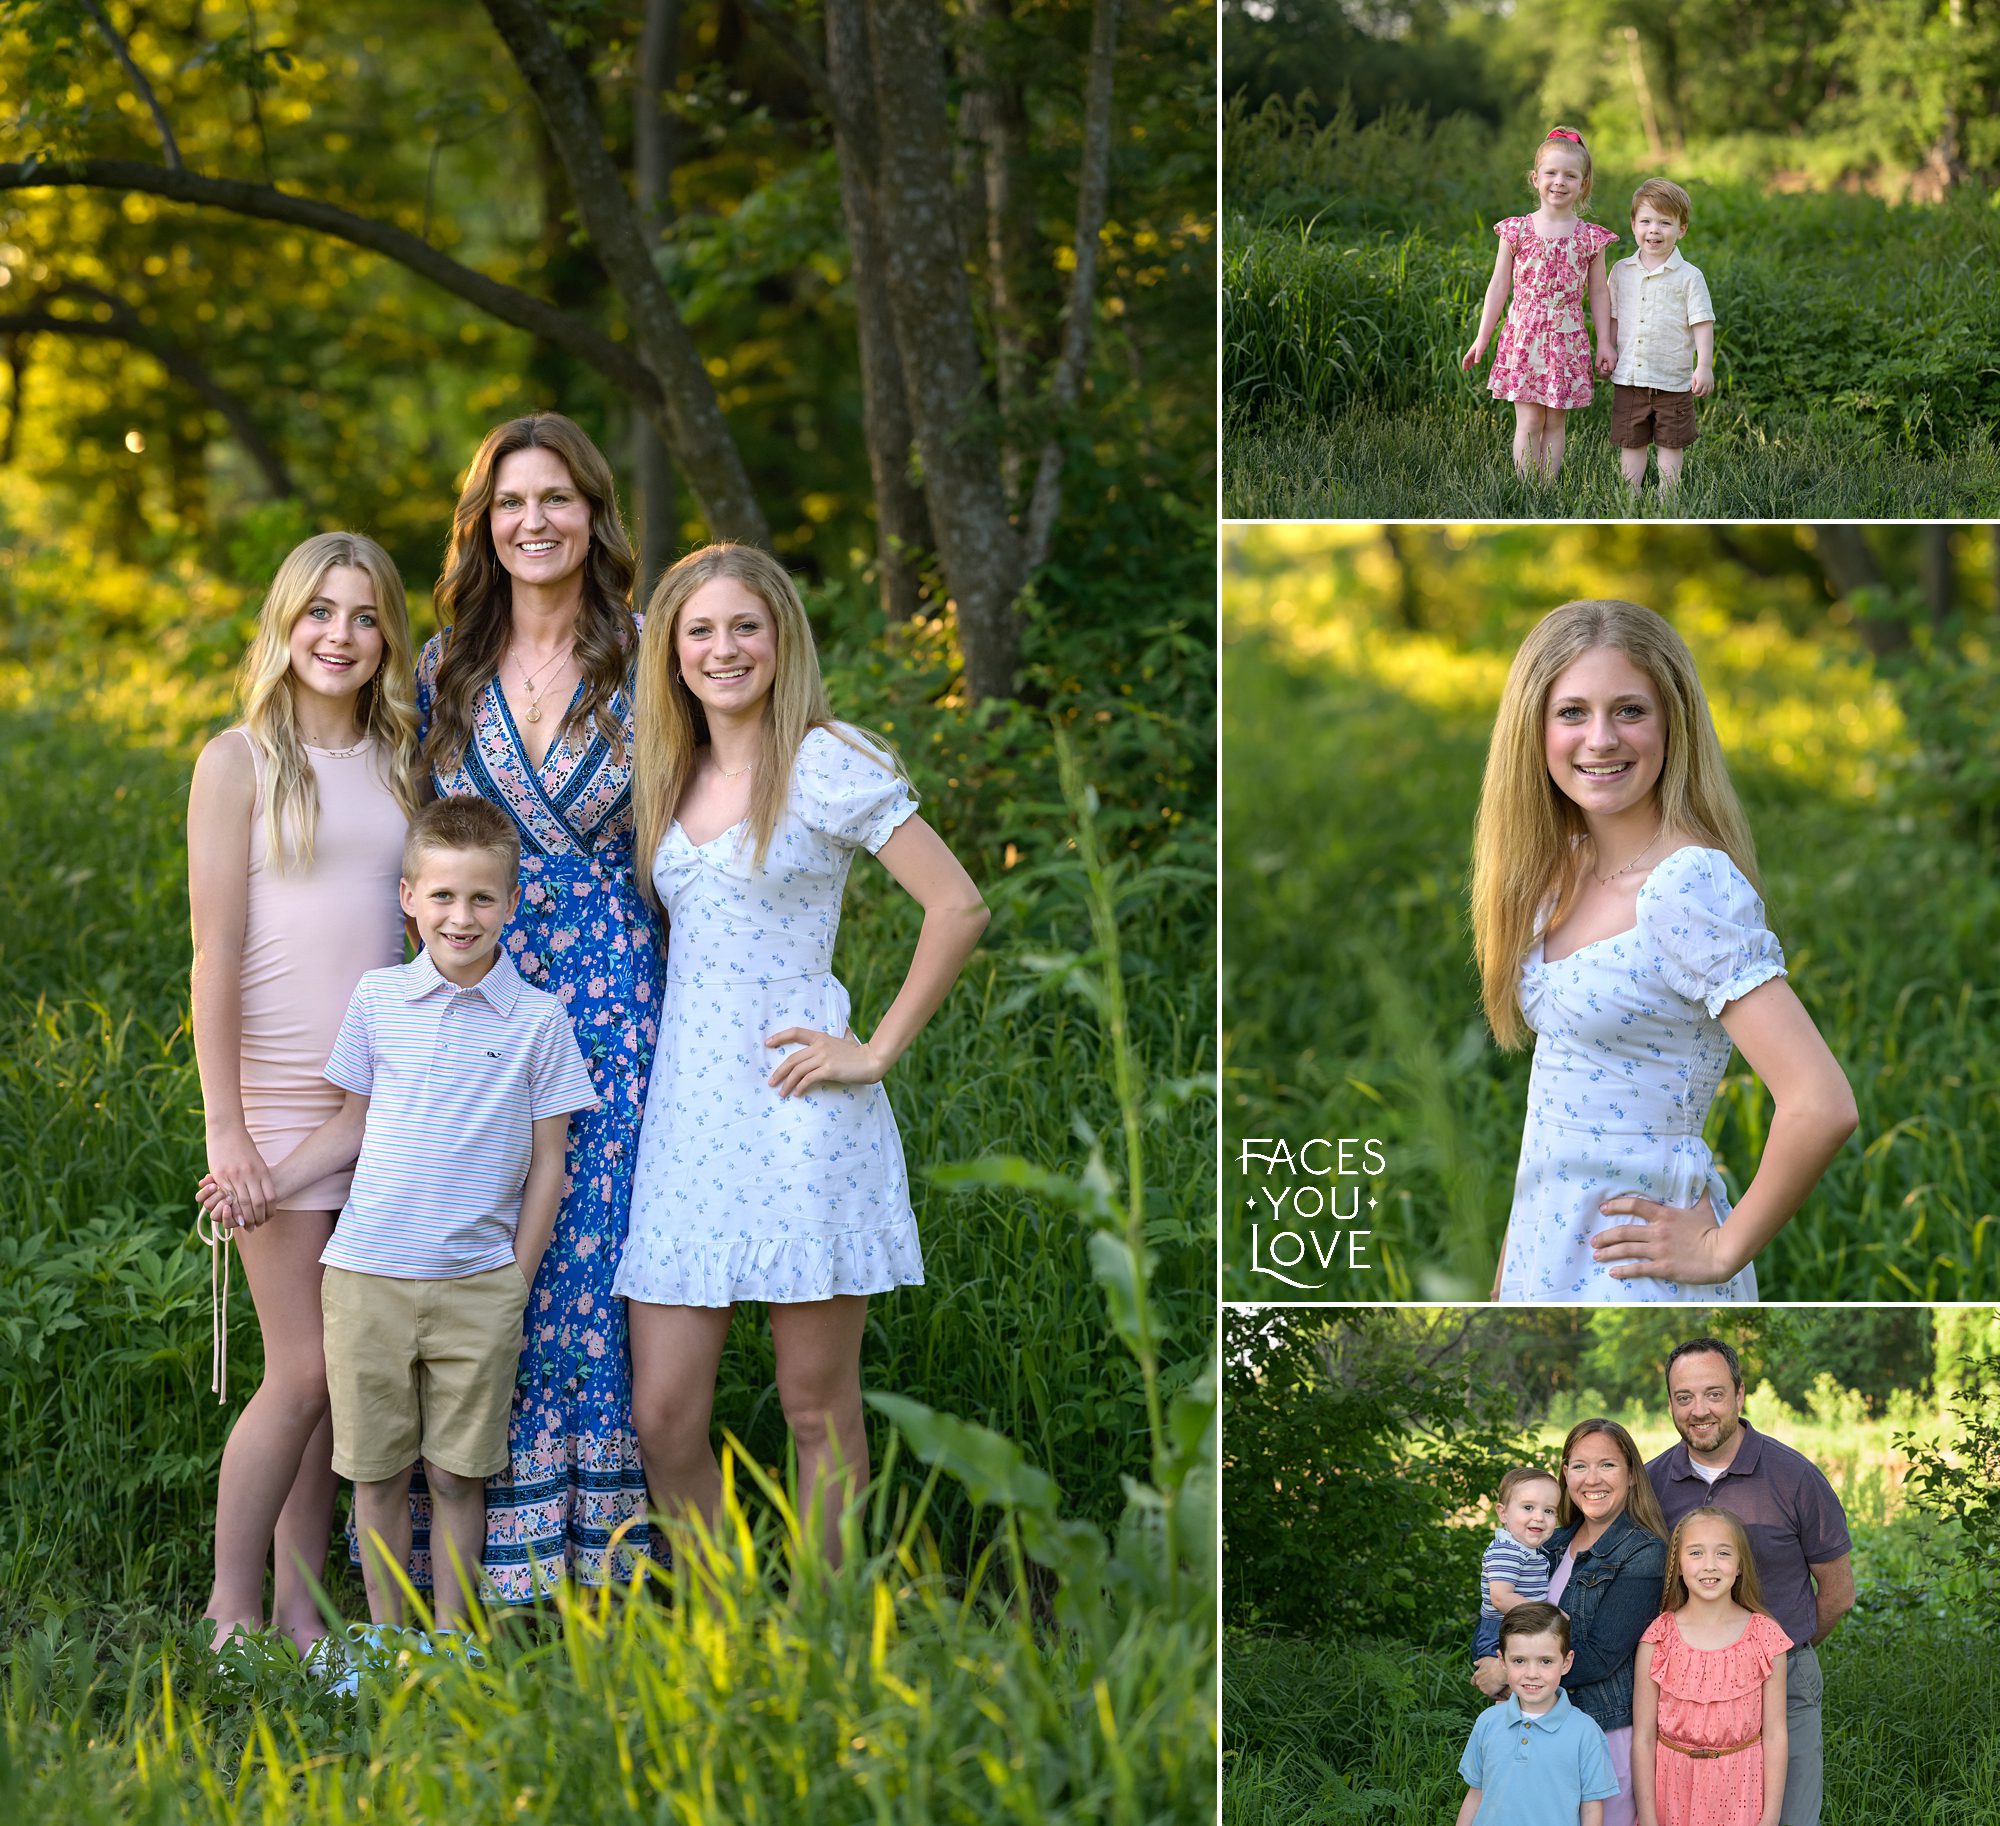 Grid of families and children photographed outdoors, surrounded by trees and grass. All photographed by photographer Helen Ransom of Faces You Love, located in Overland Park, KS.